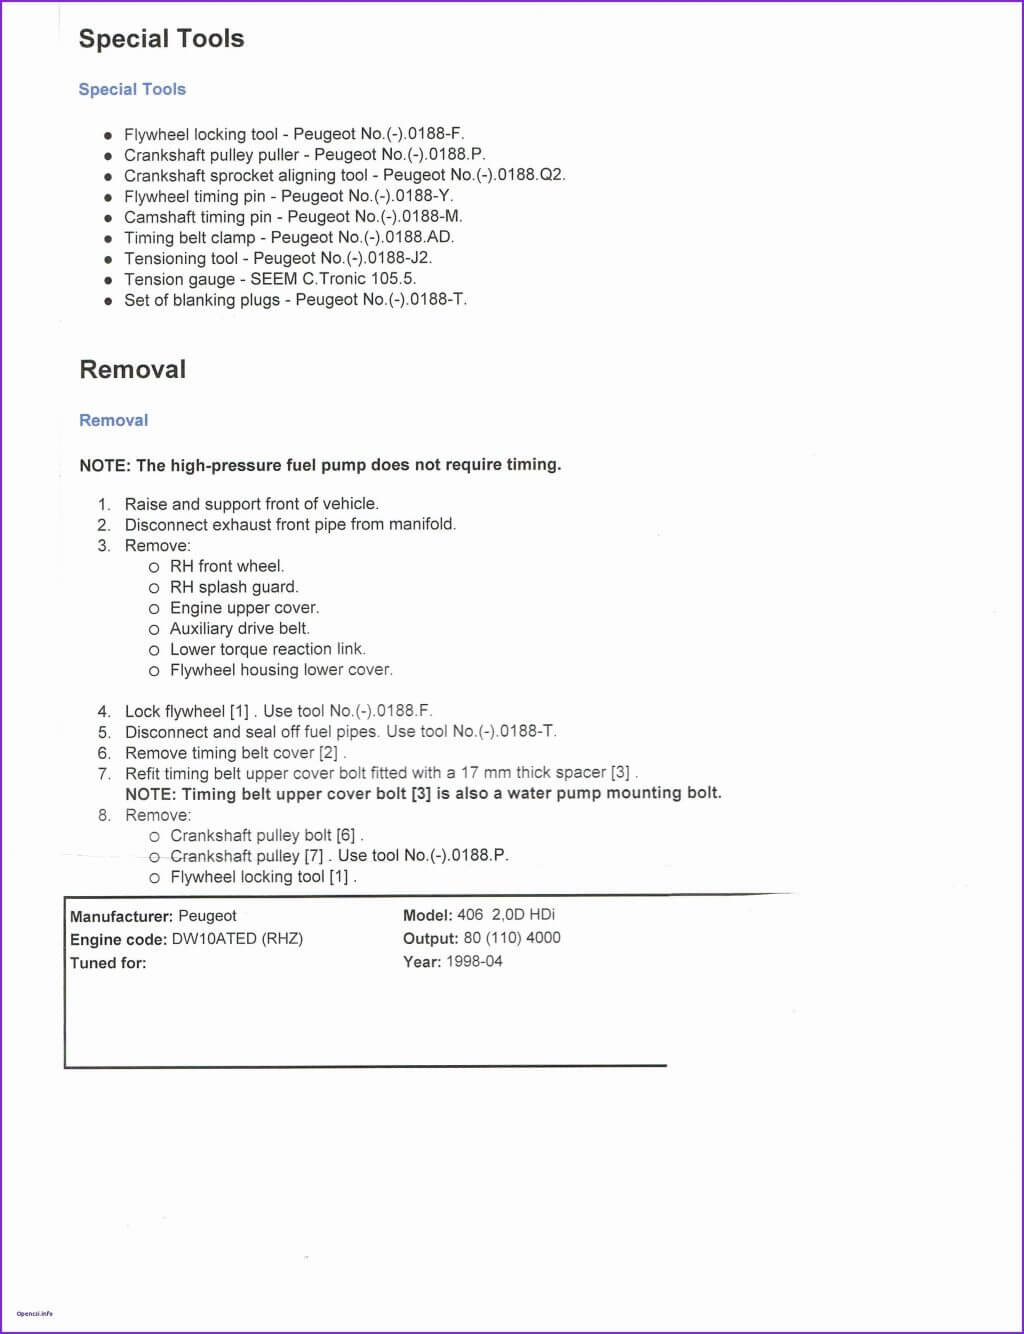 Business Report Template Templates Format Examples A C2 90 With Word Document Report Templates